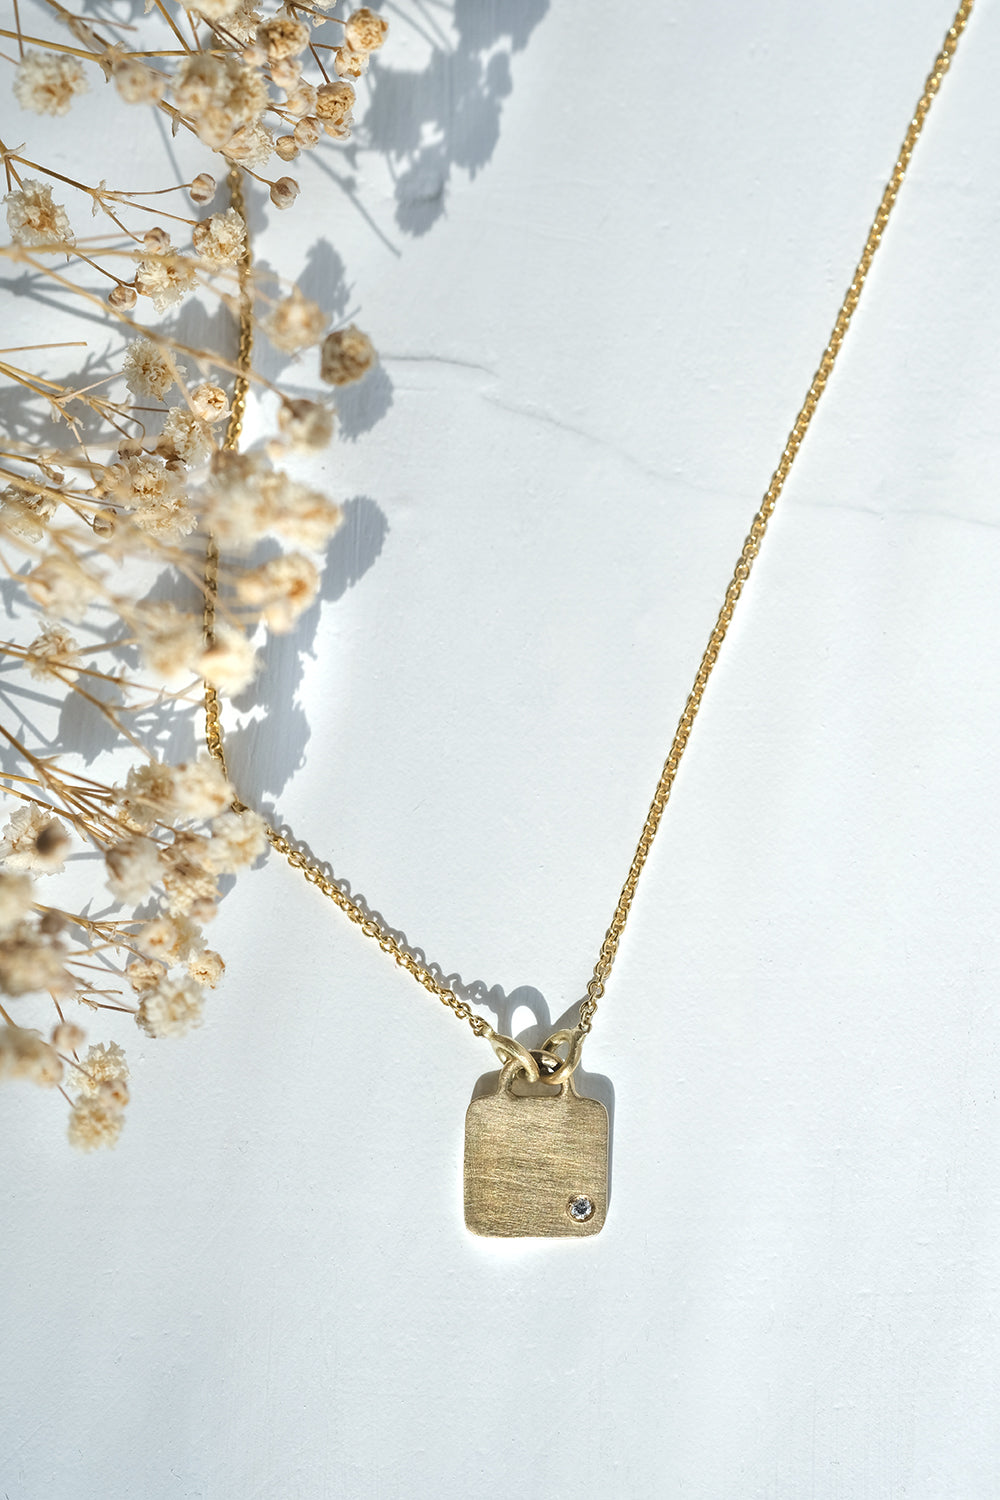 Gold Necklace With A Square Pendant Set With A Diamond